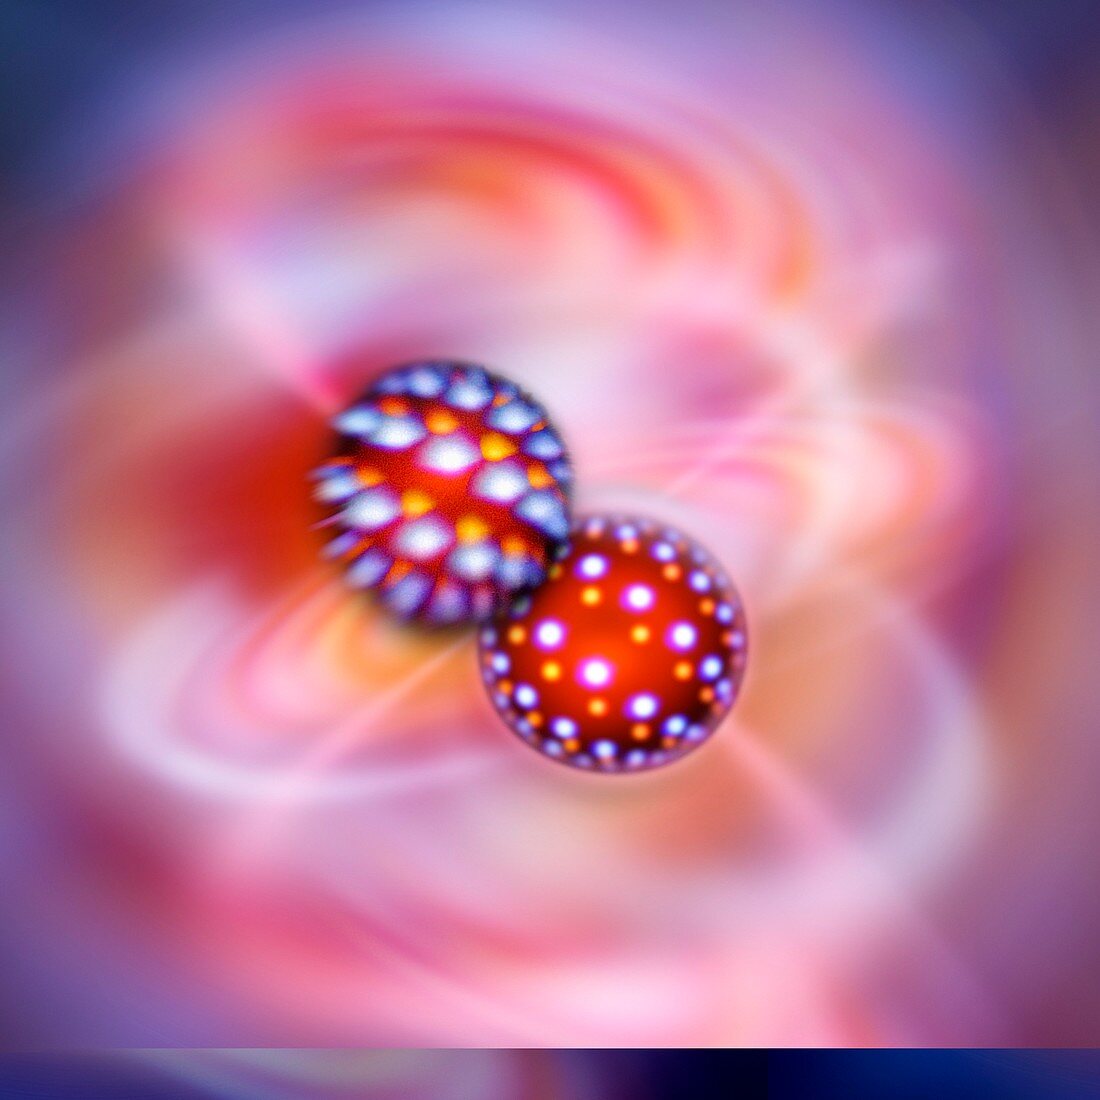 Atomic interactions,conceptual image